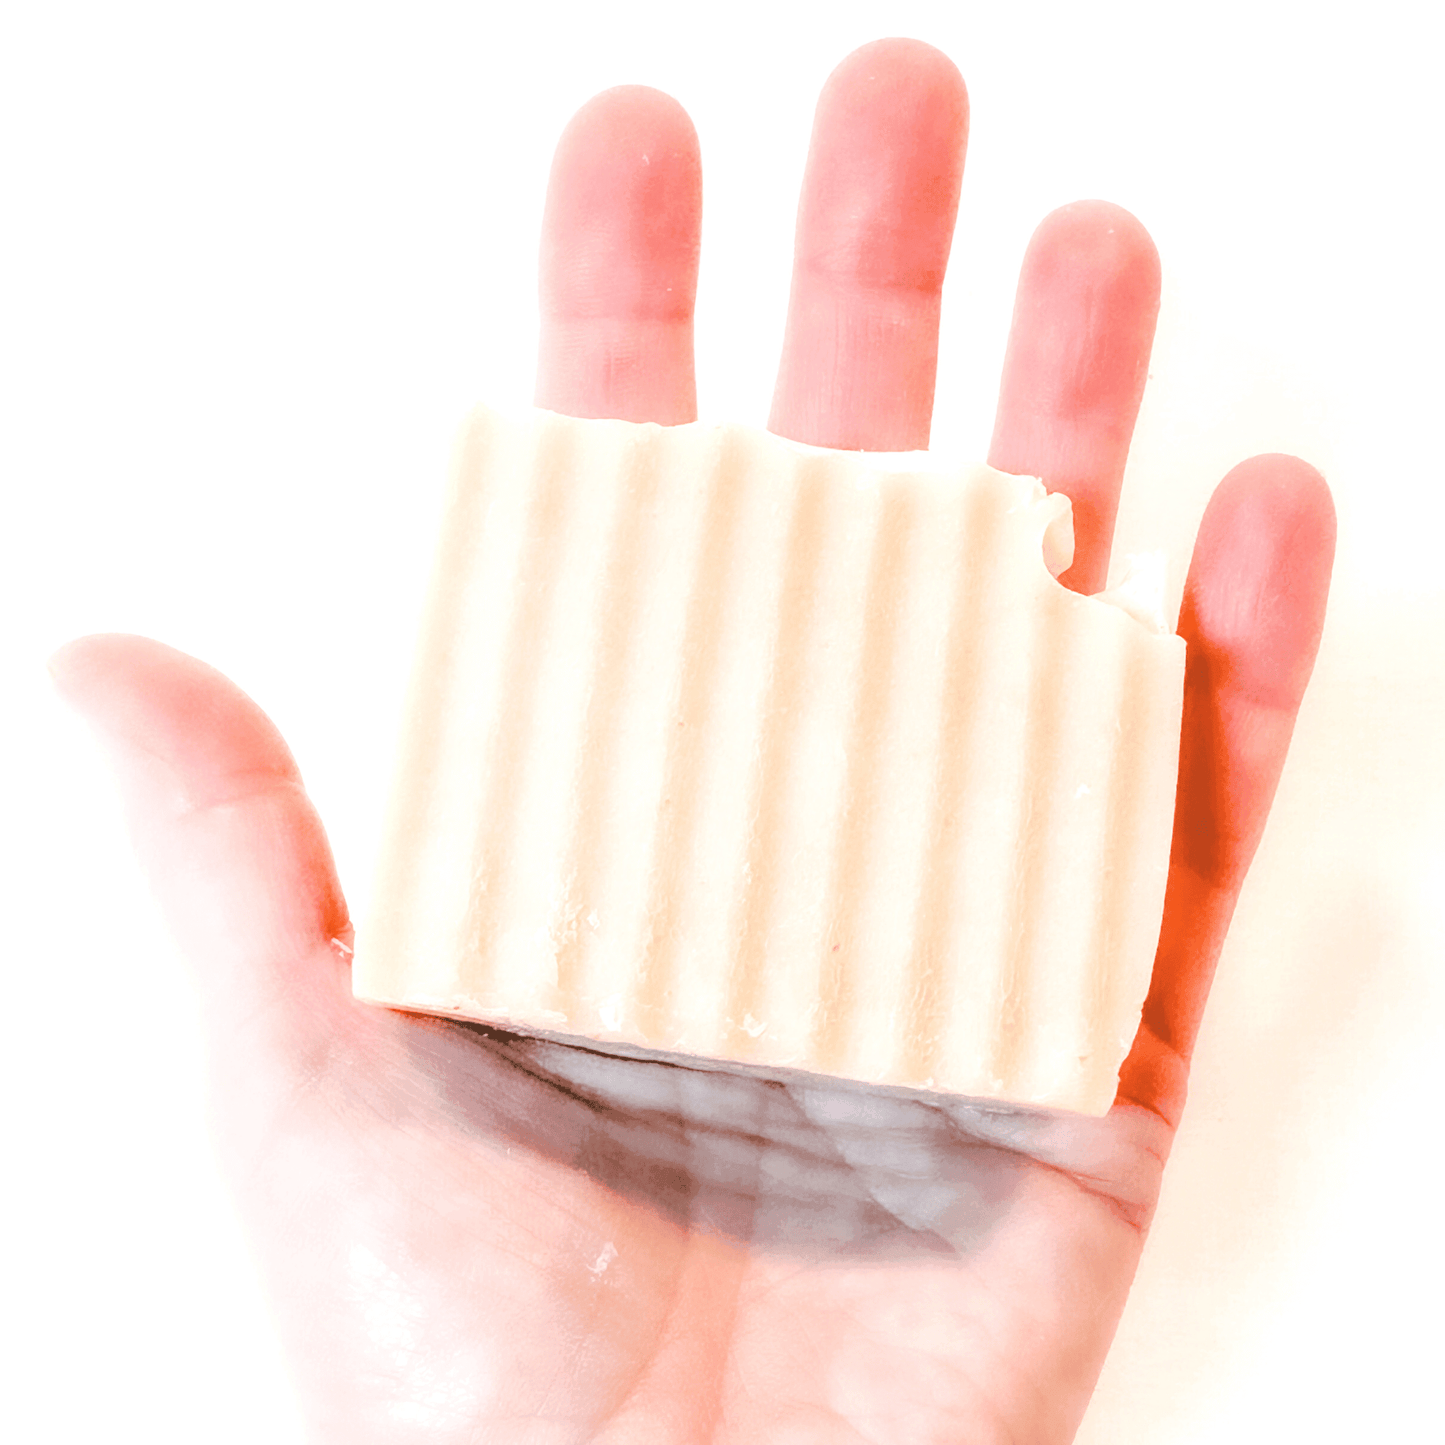 raw goat milk soap bar in hand to show size